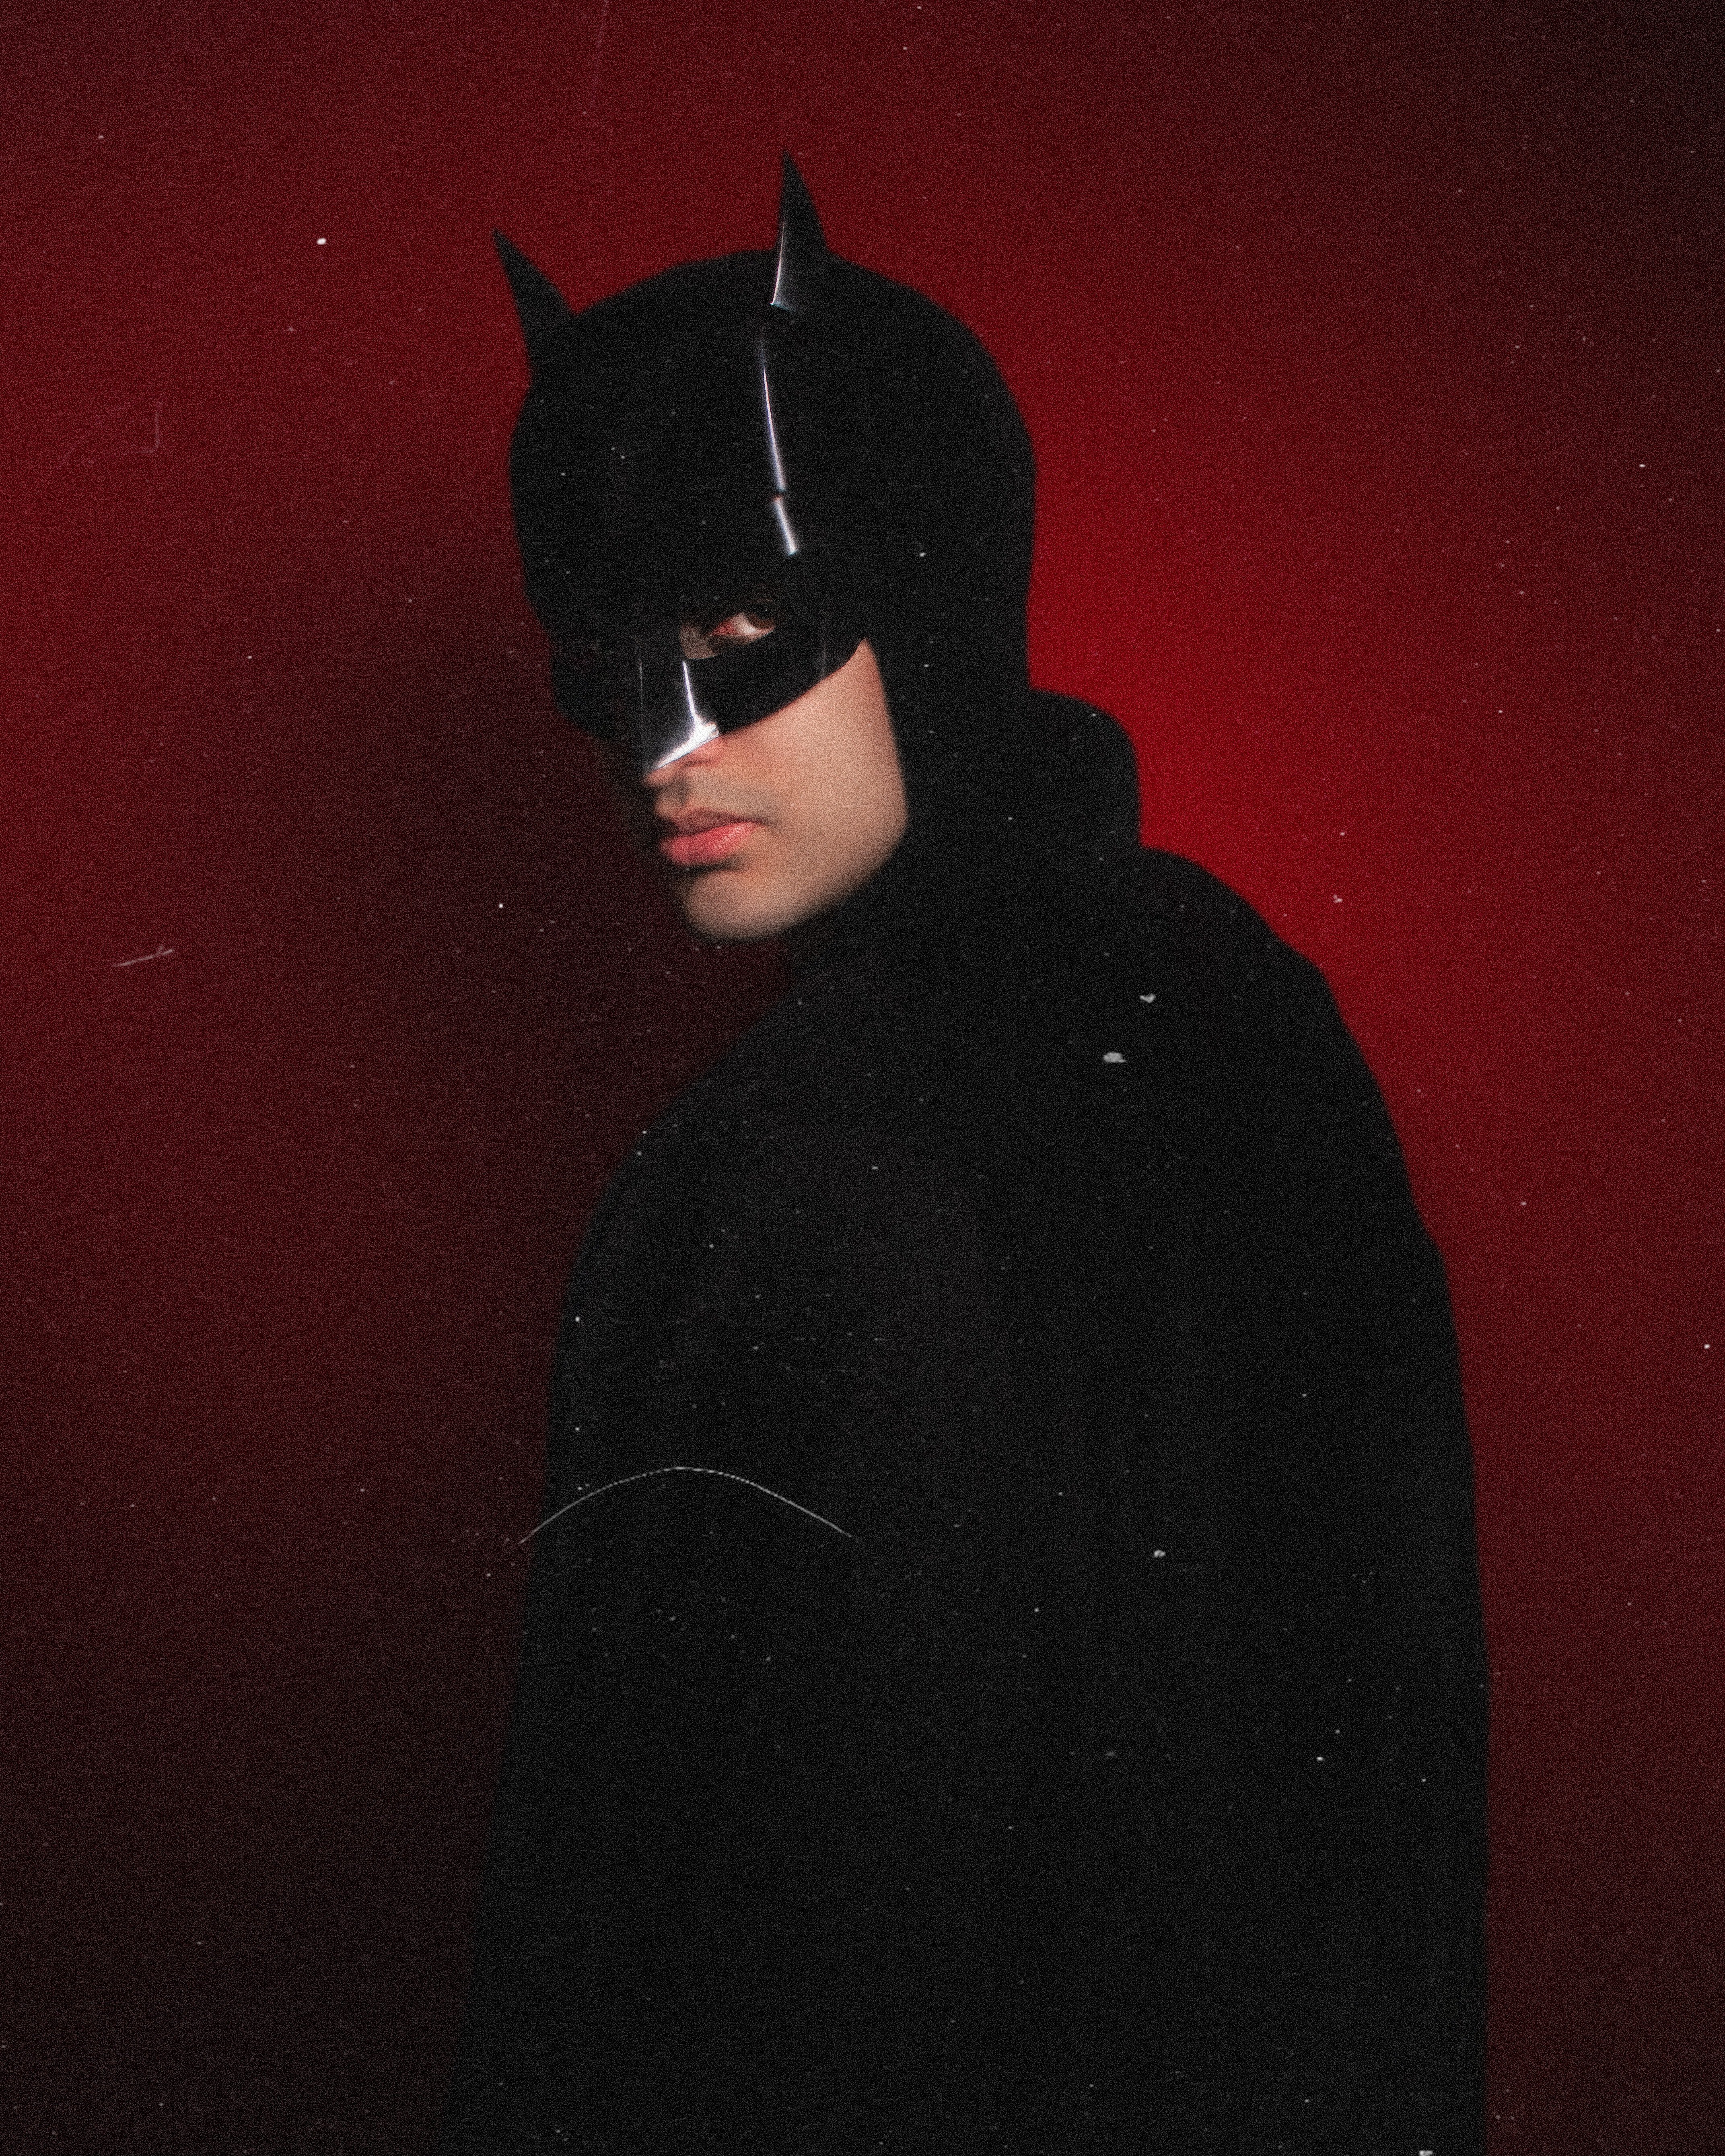 Jimmy put on his Batman costume and waited for the neighbors to litter on the yard again. | Source: Pexels